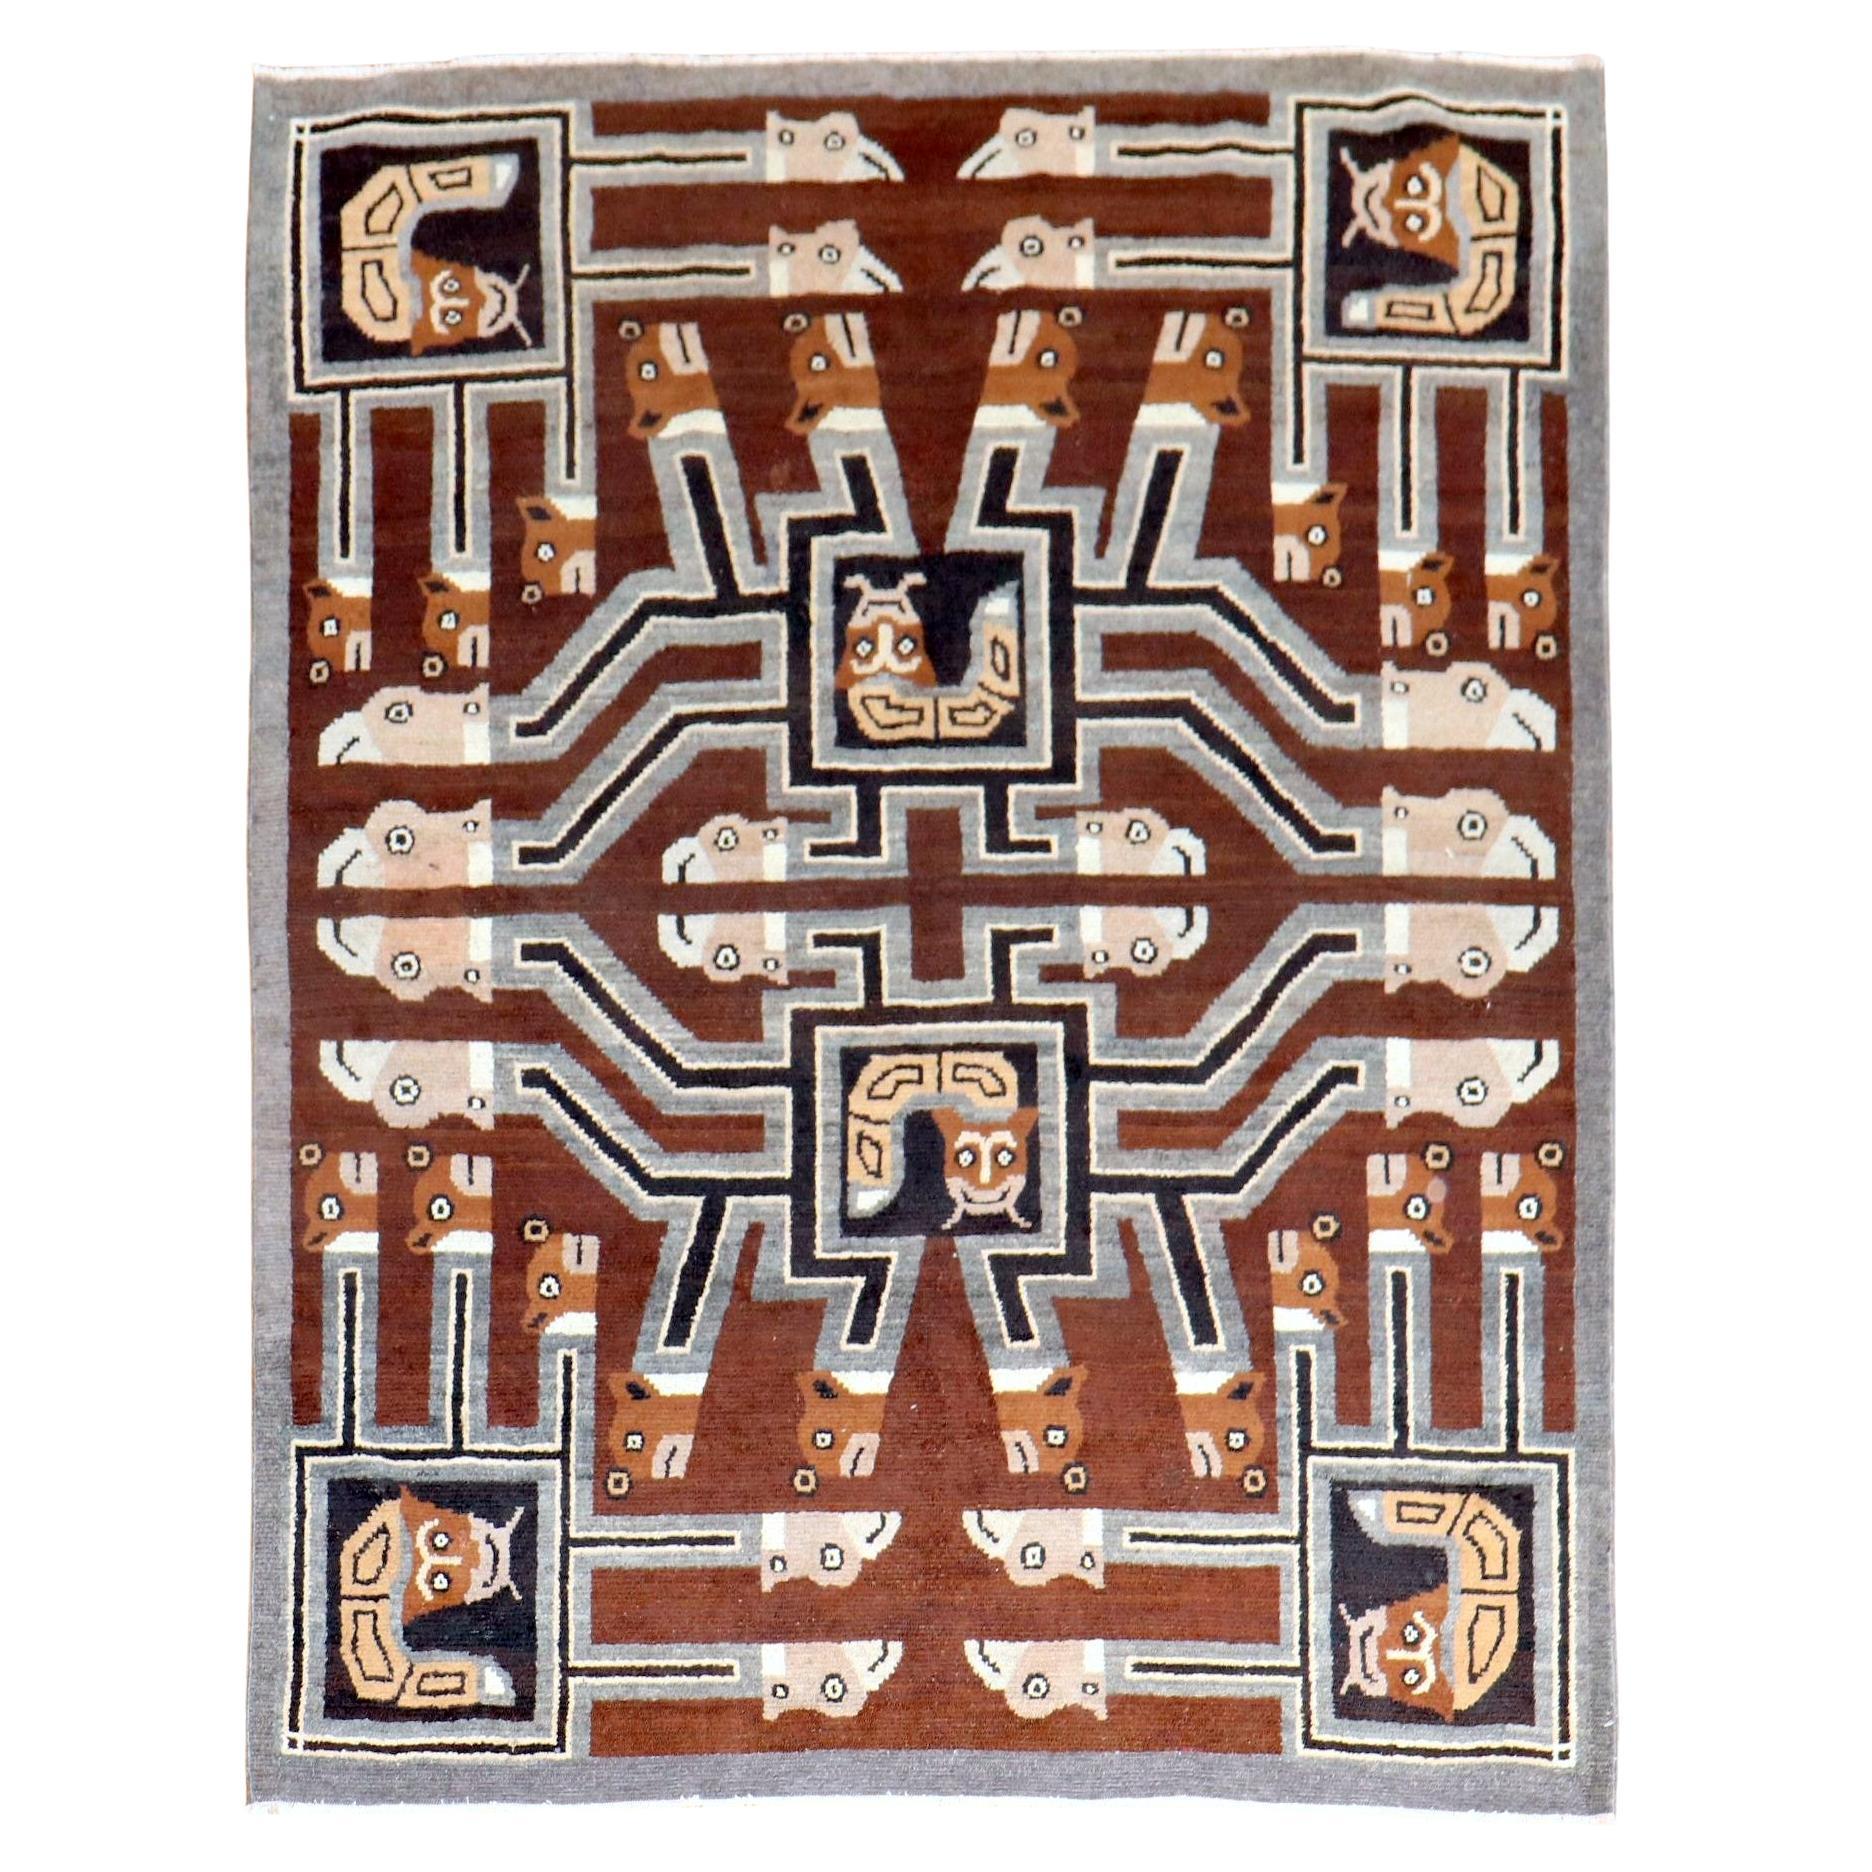 Peculiar Indonesian Pictorial Square Head Rug For Sale